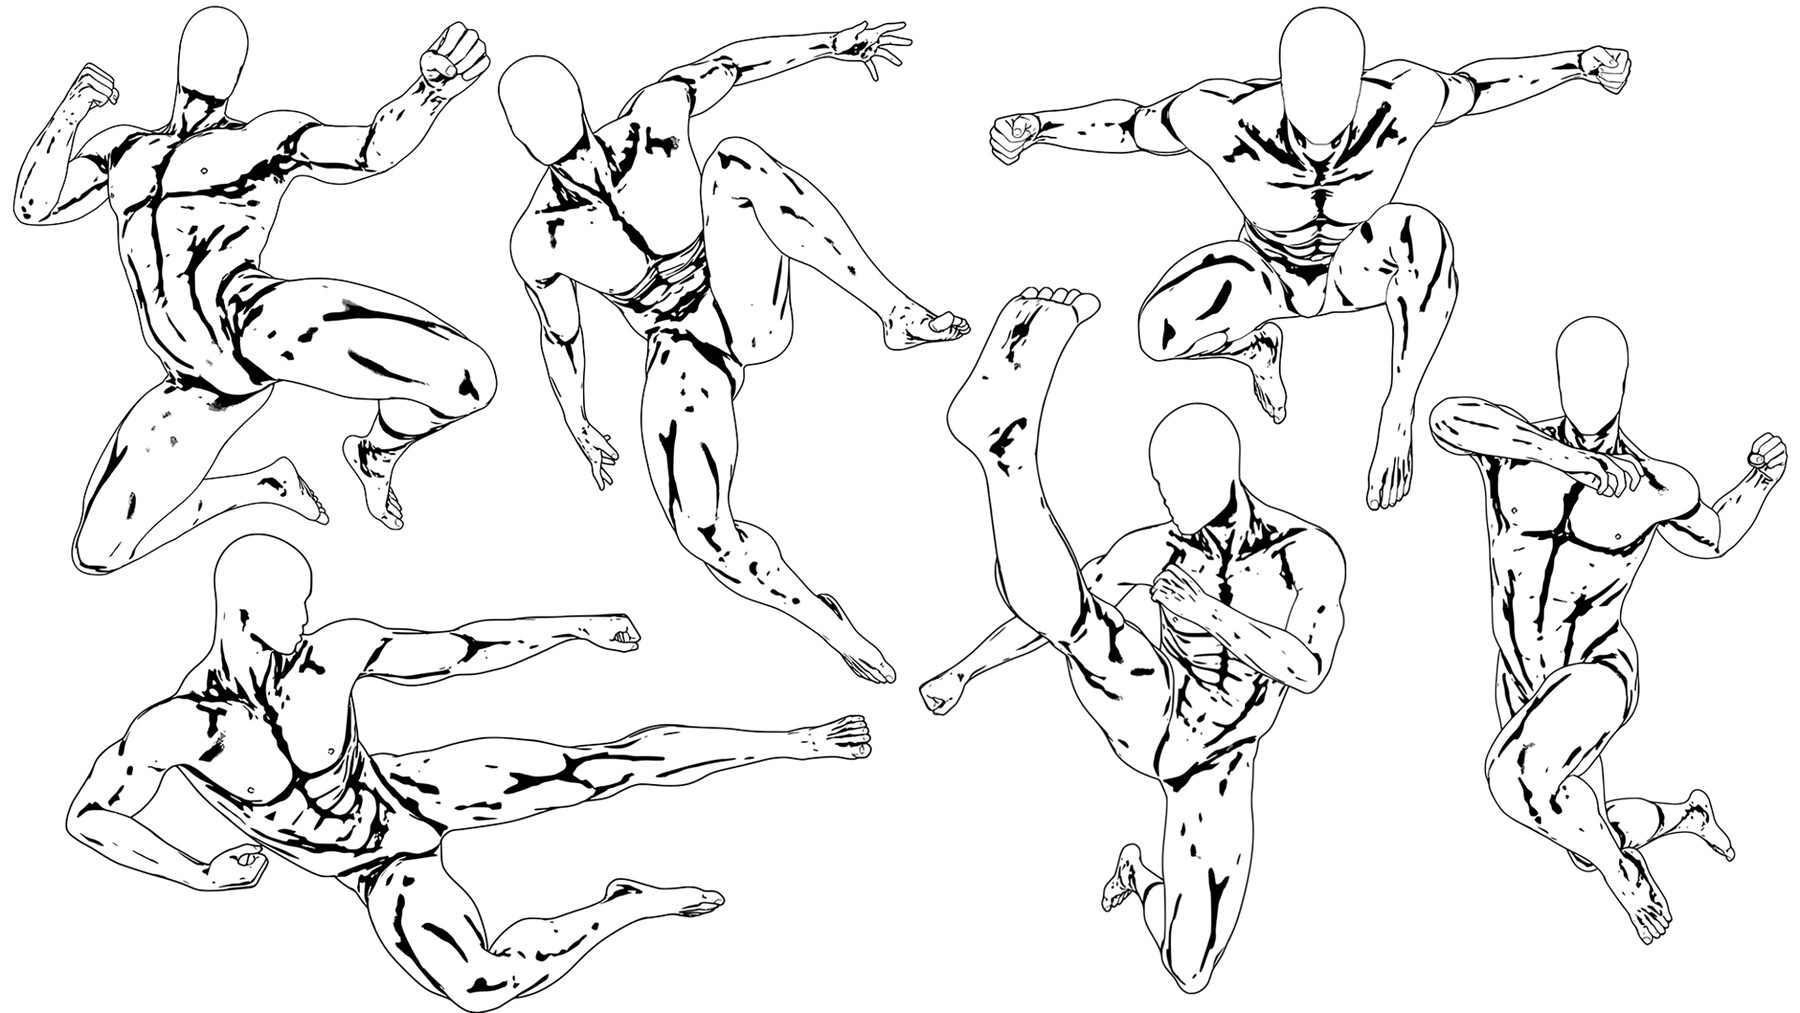 Online Course: How to Draw Dynamic Hand Poses - Step by Step from  Skillshare | Class Central